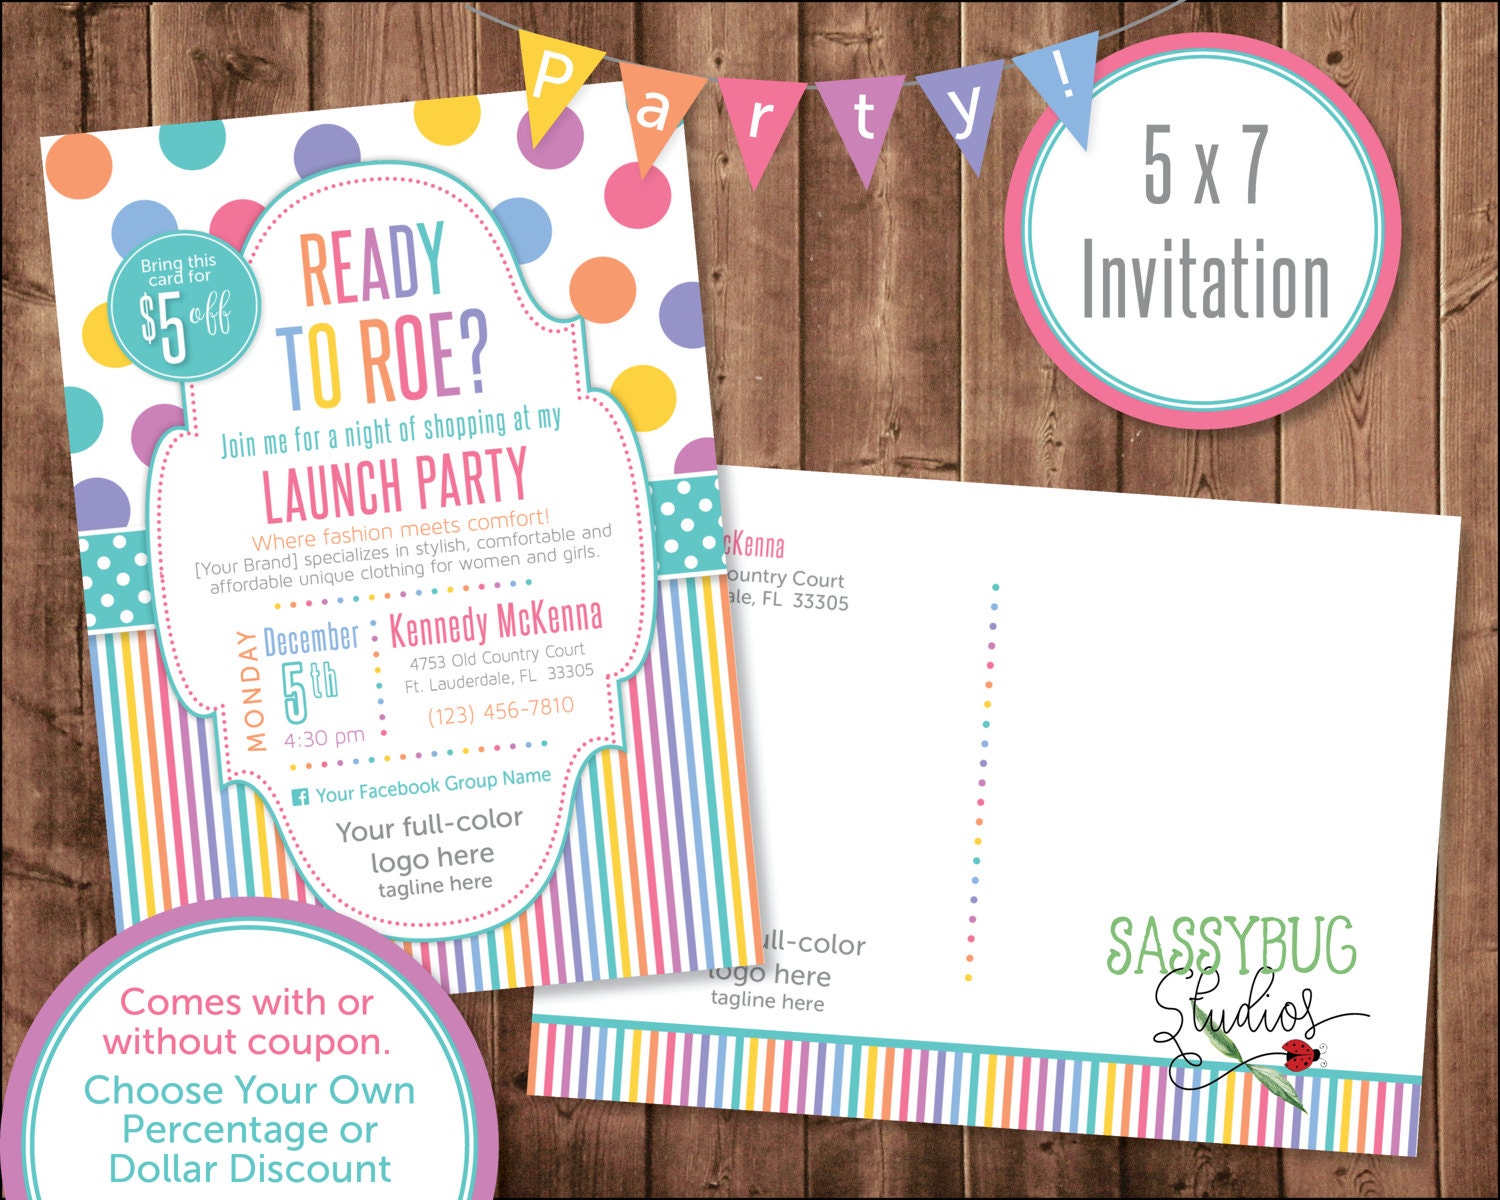 Launch Party Postcard Invitation Personalized 5x7 inches